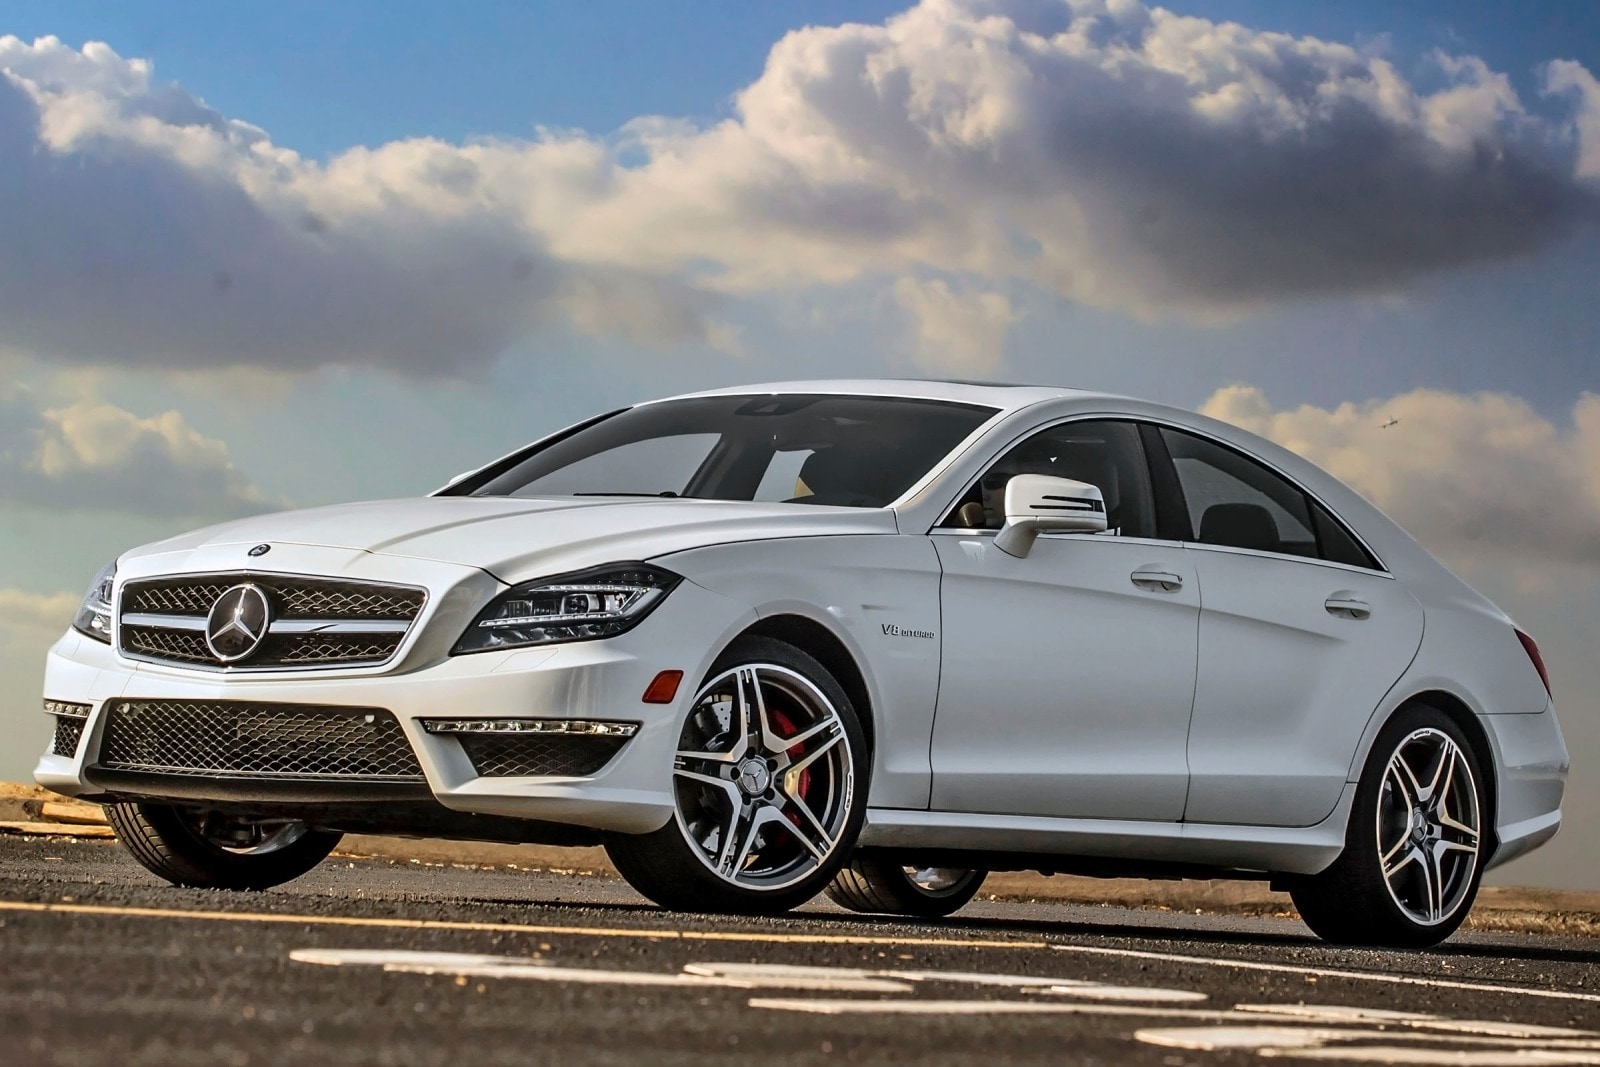 Used 2014 Mercedes-Benz CLS-Class CLS63 AMG 4MATIC S-Model Review | Edmunds